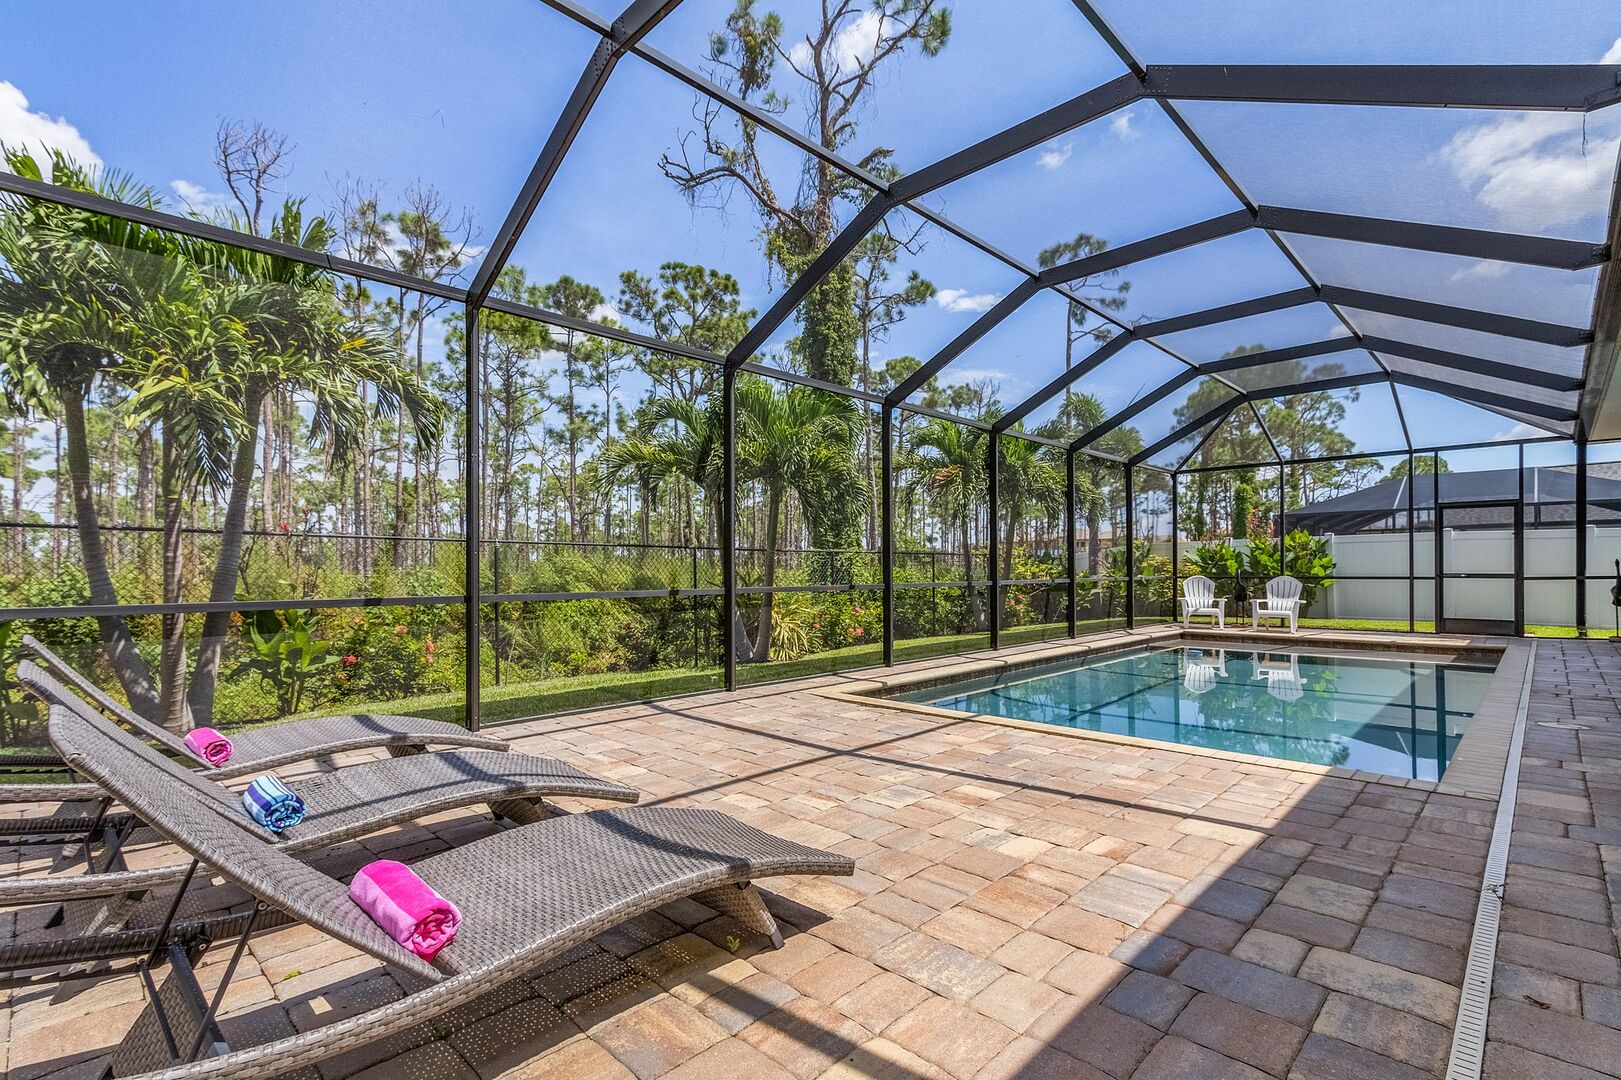 Private heated pool and fenced in yard